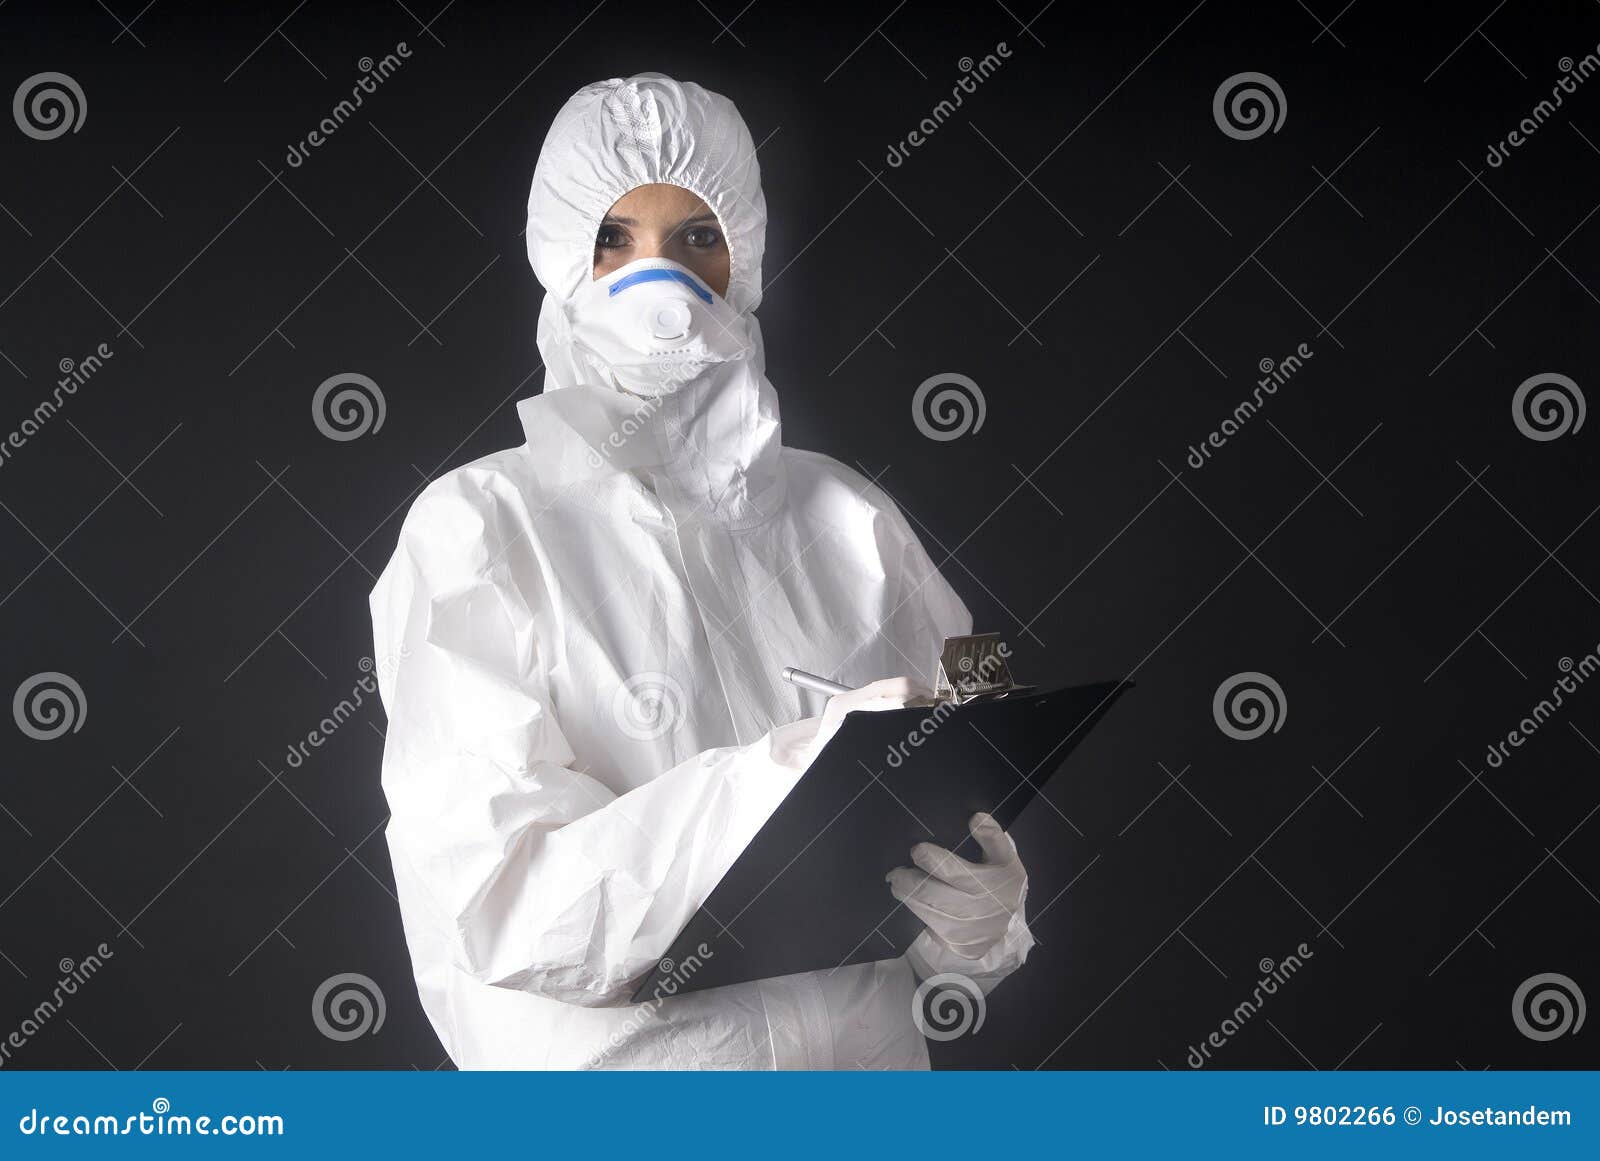 Biologic Dress Protection with a or Swine Flu Stock Photo - Image of ...